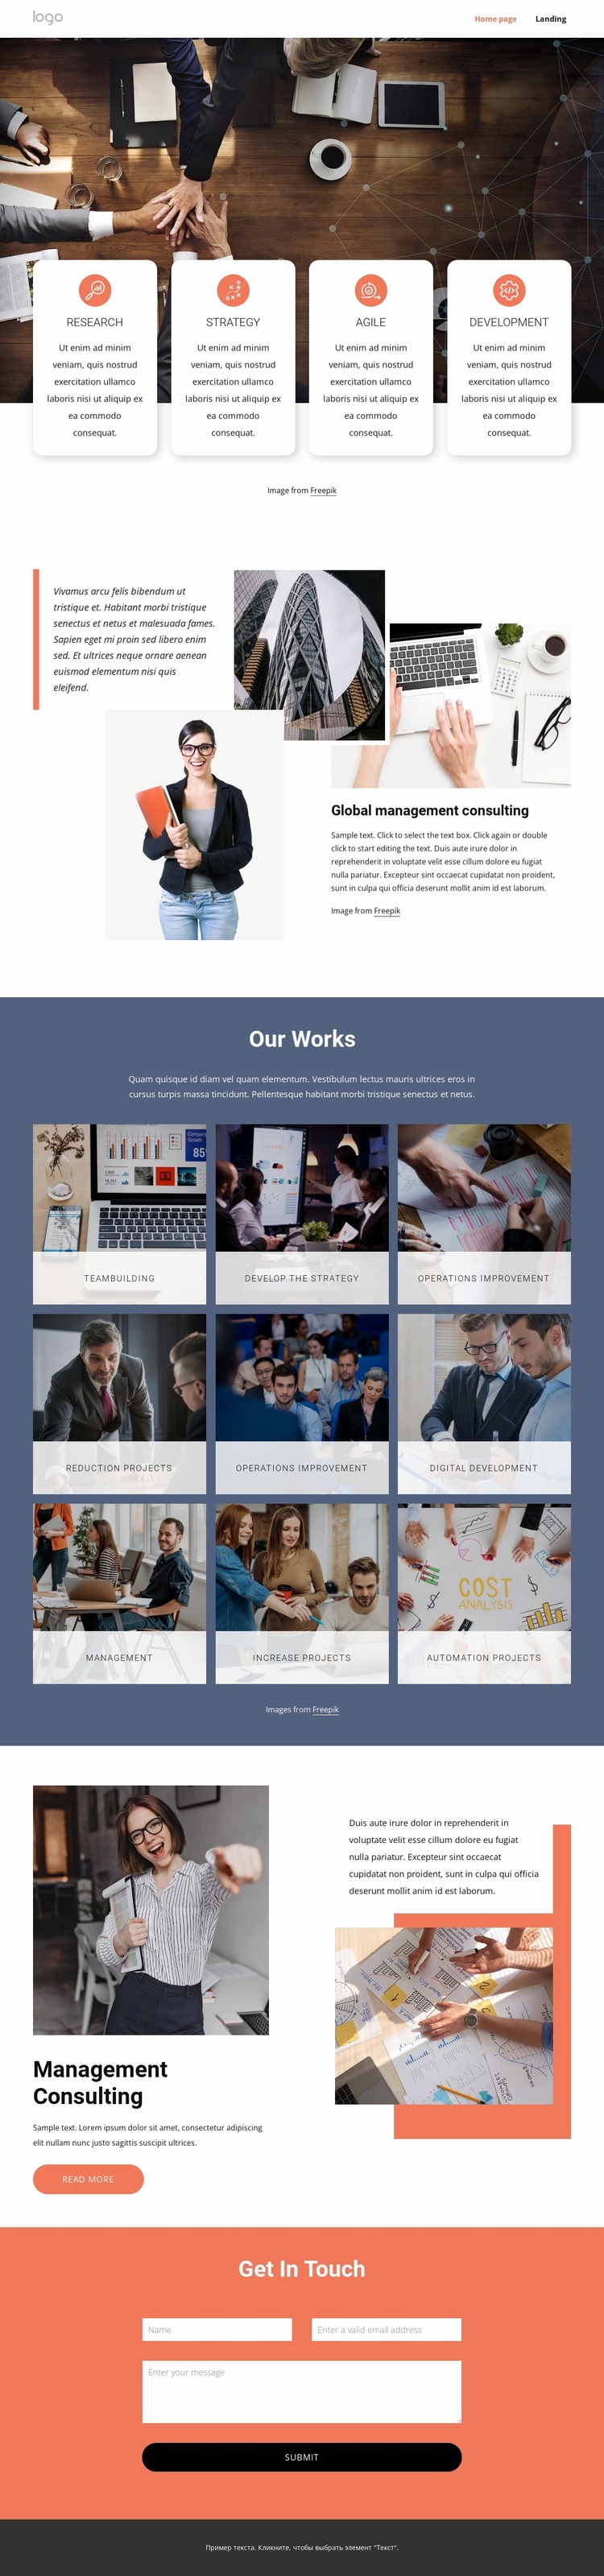 The leading consulting firms for management services Website Mockup